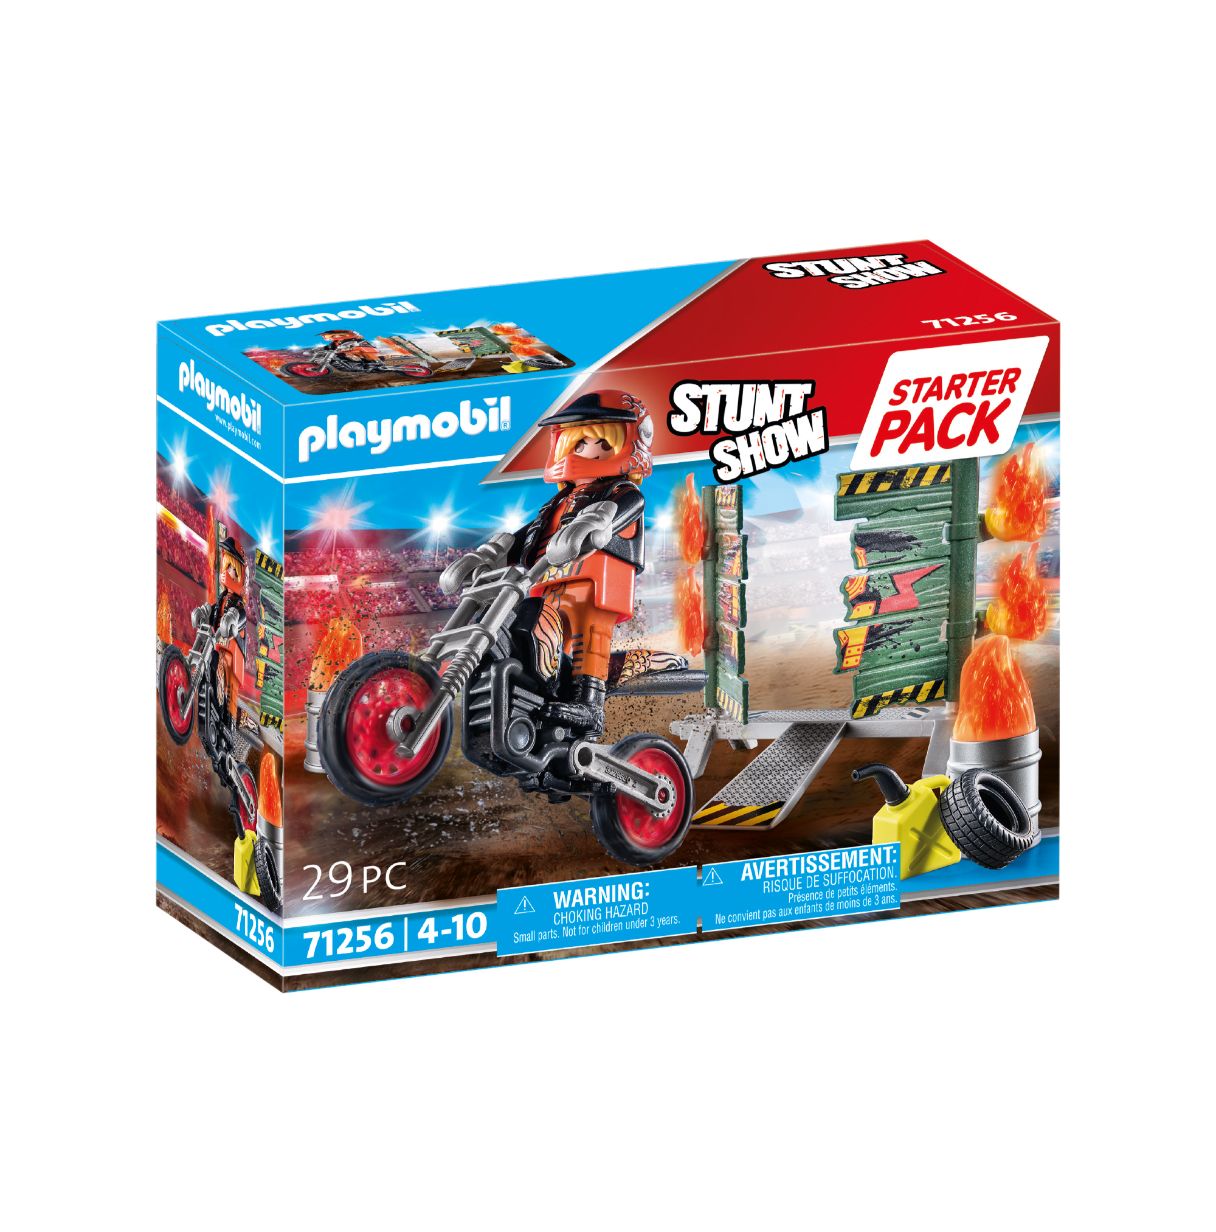 playmobil starter pack moto pared fuego (71256)